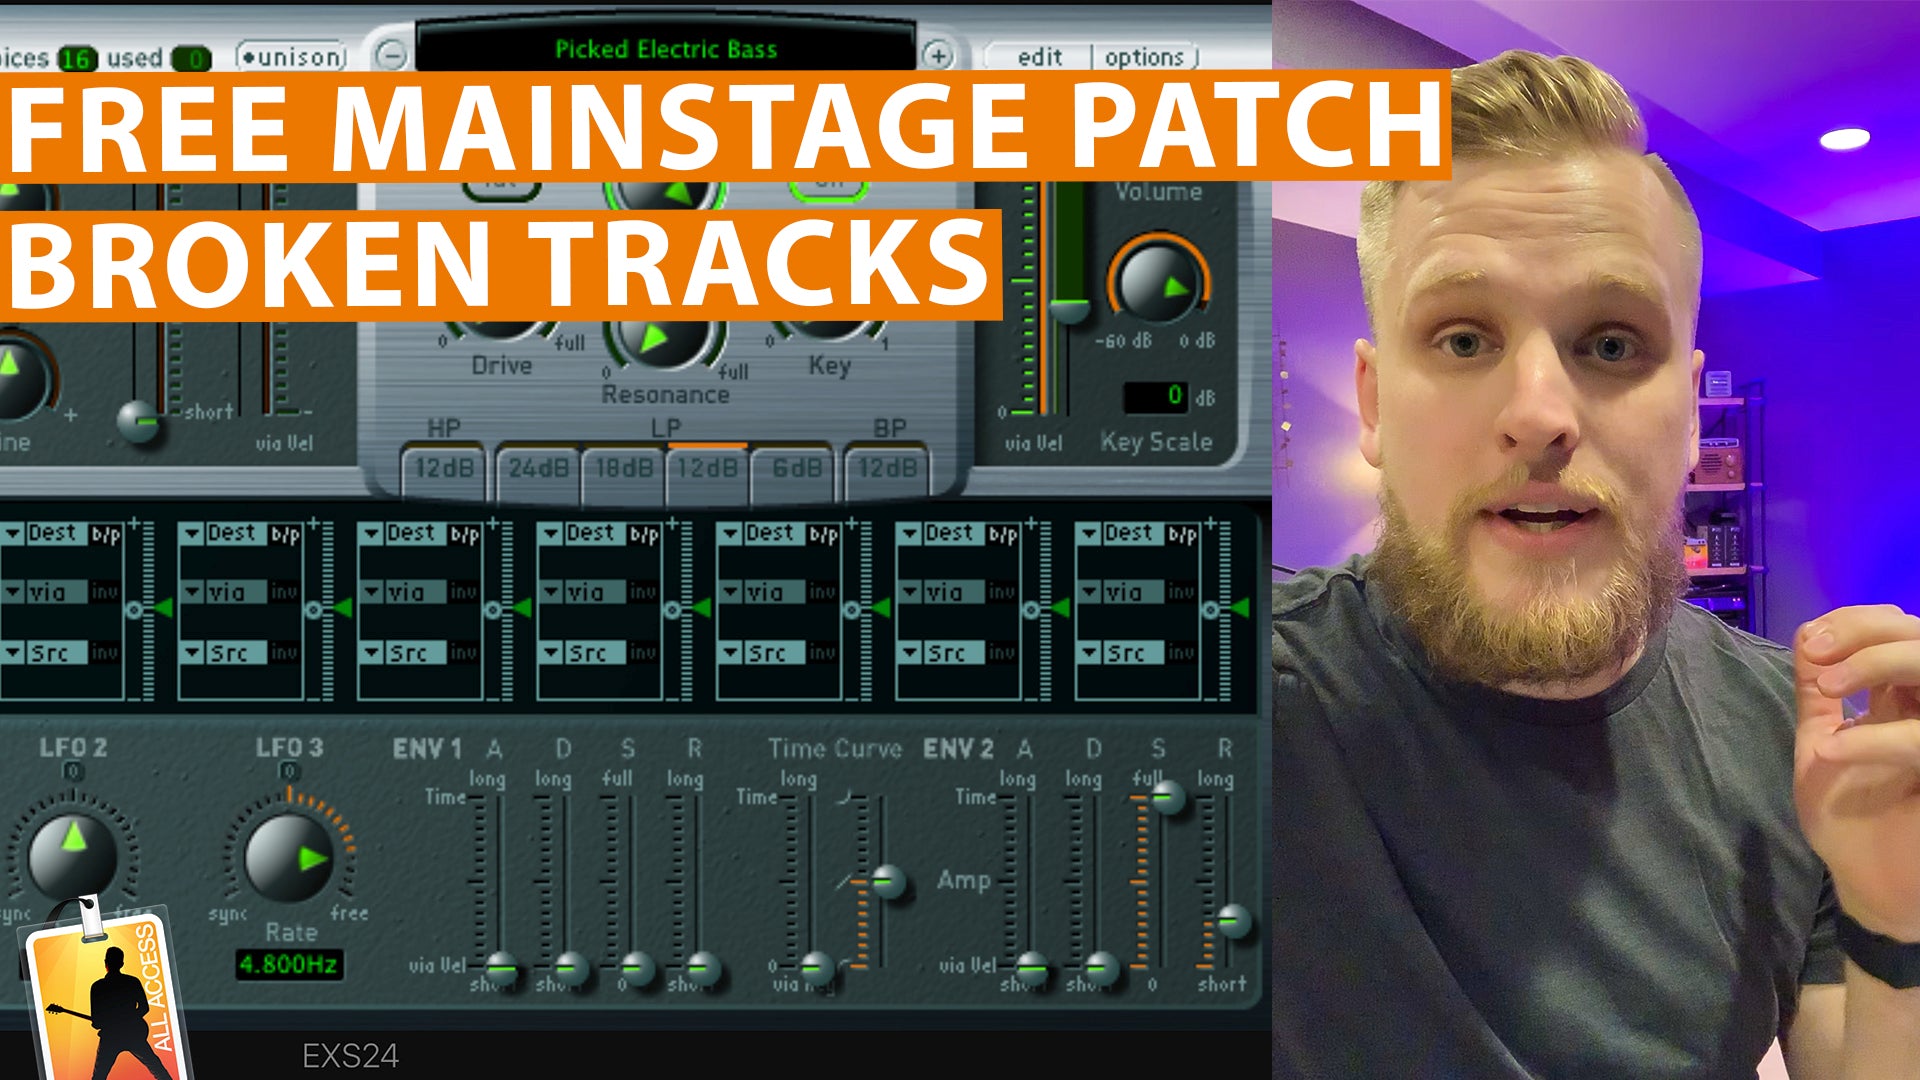 Free MainStage Worship Patch! - Broken Tracks Experimental Texture with Ambience